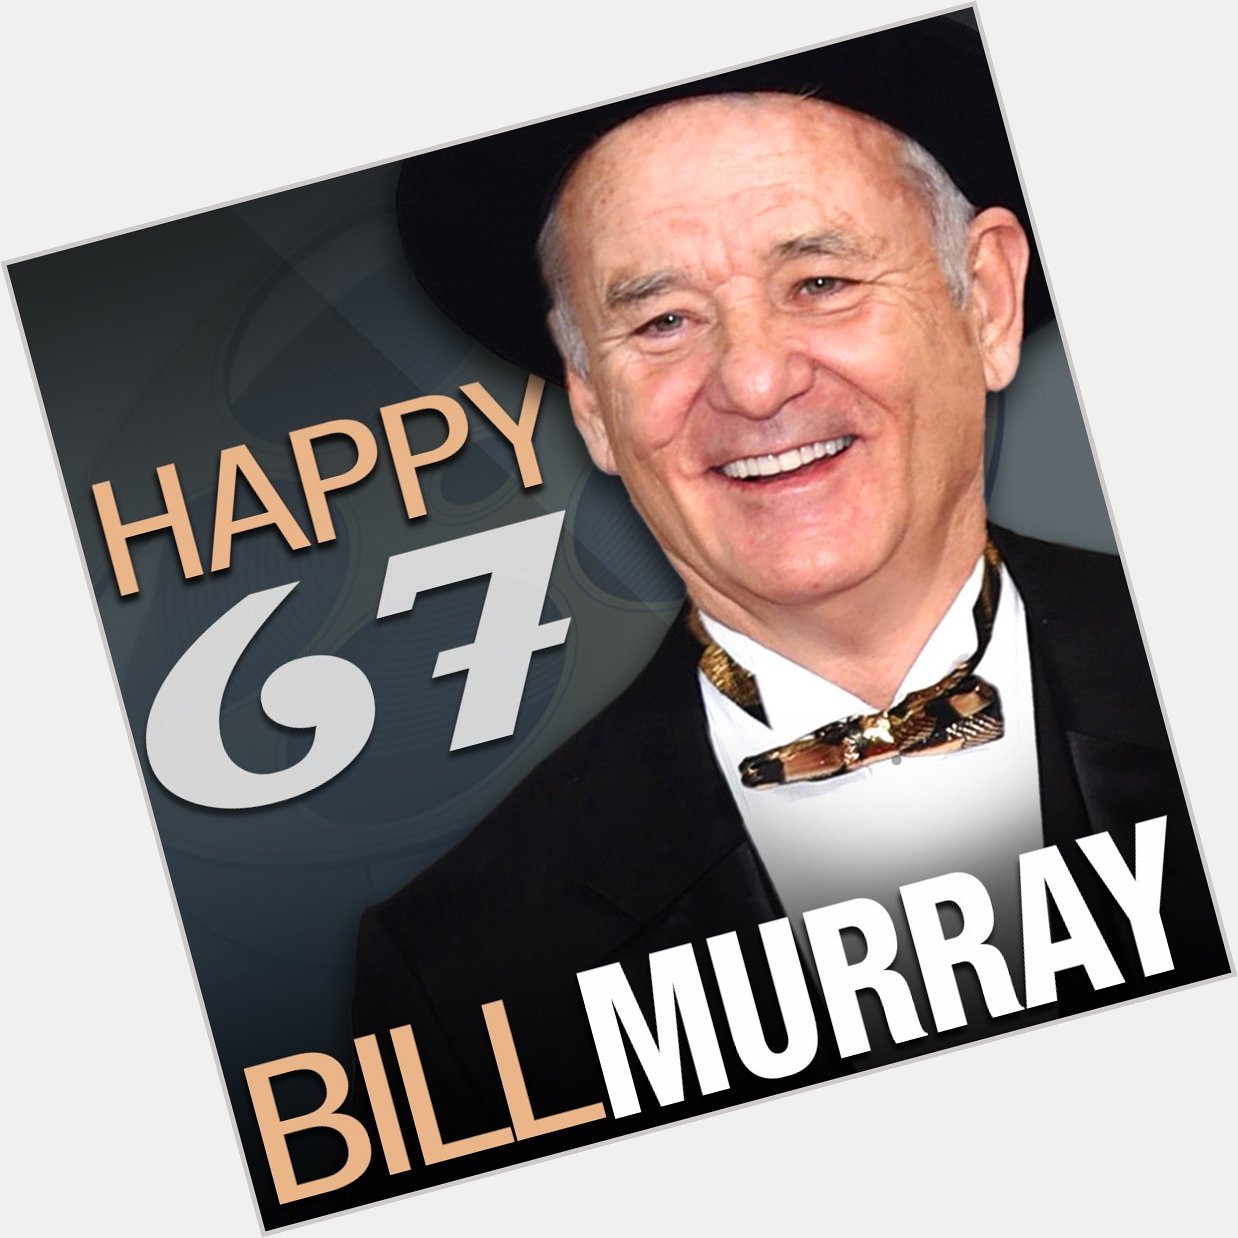 Happy Birthday Bill Murray! The Illinois-native and Chicago Cubs superfan turns 67 today    